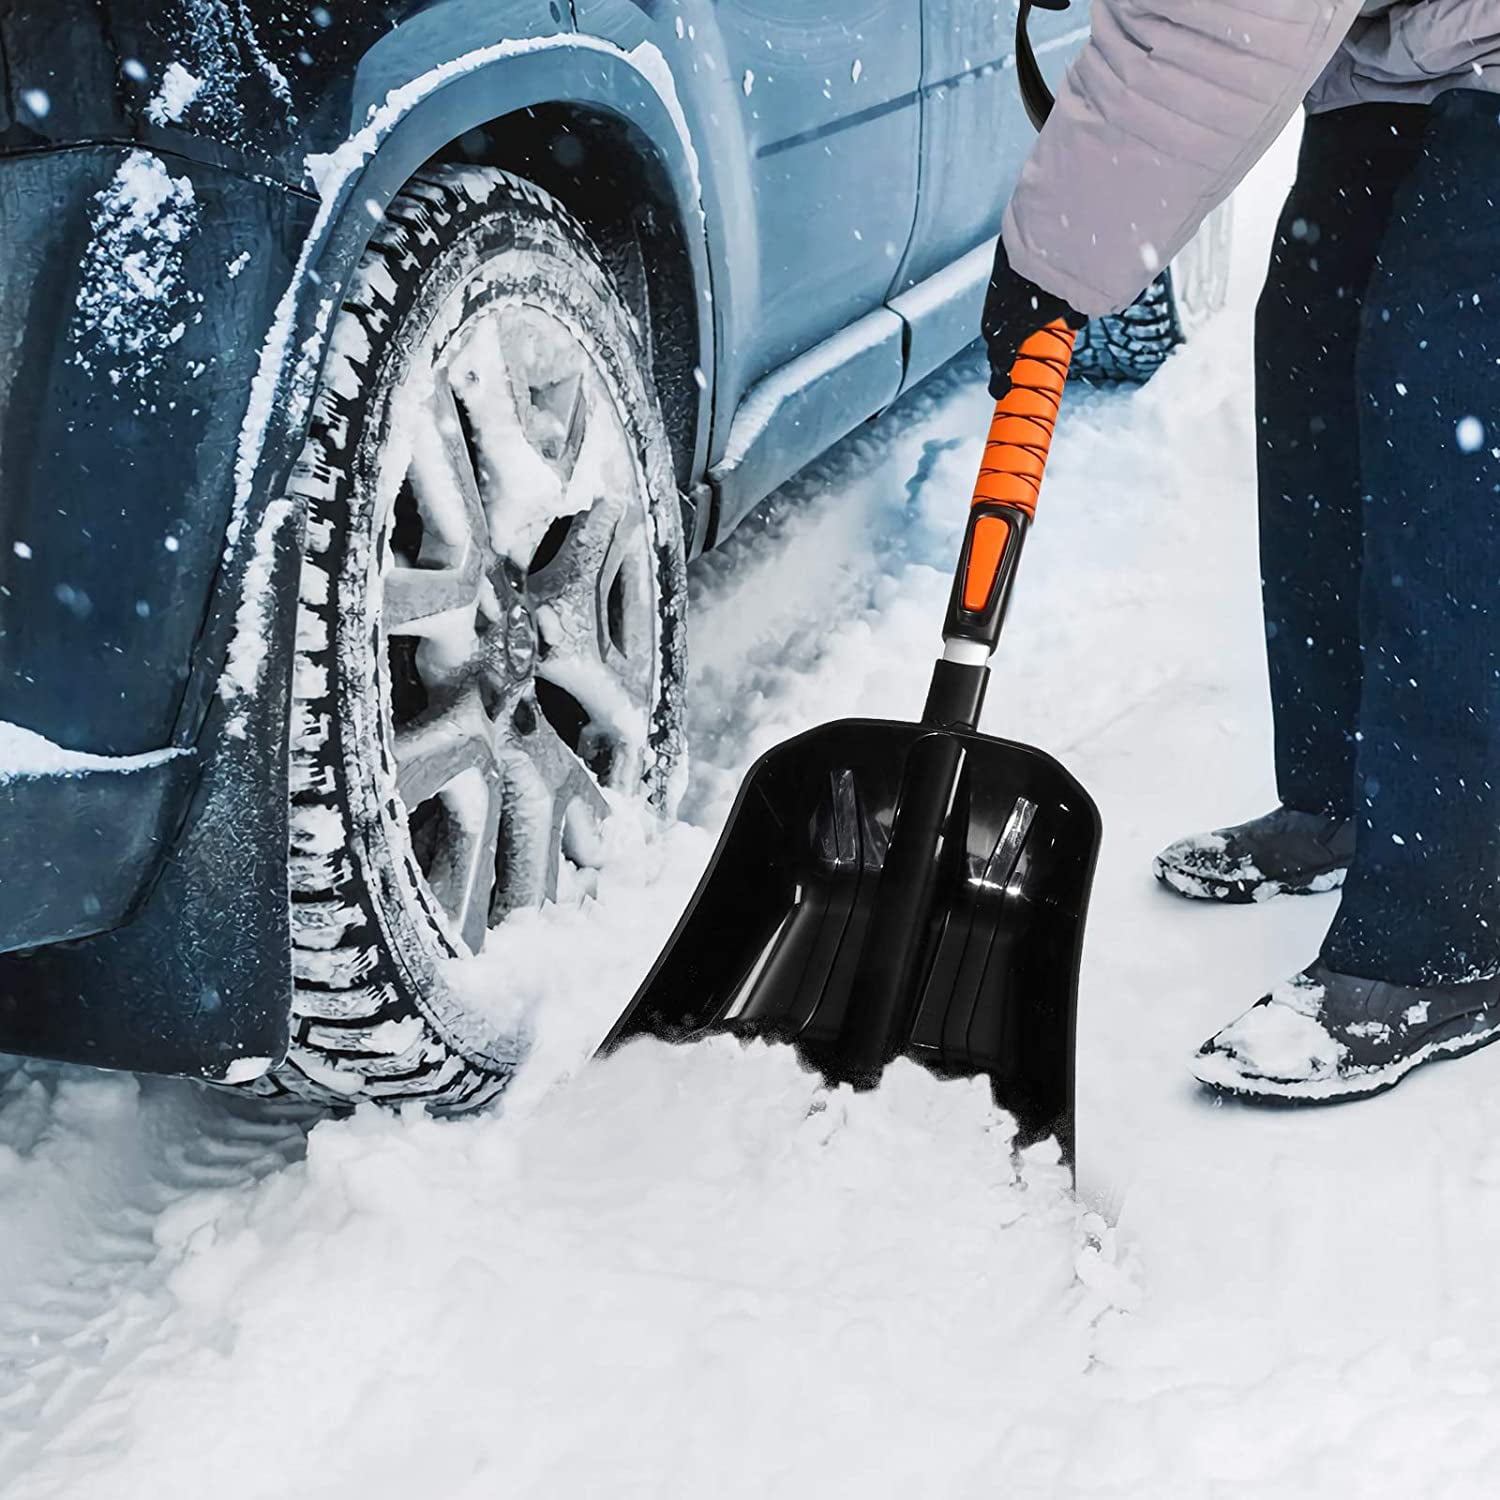 Details about   MATCC Car Snow Brush Removal Kit 45'' Extendable  w Squeegee & Ice Scraper...NEW 